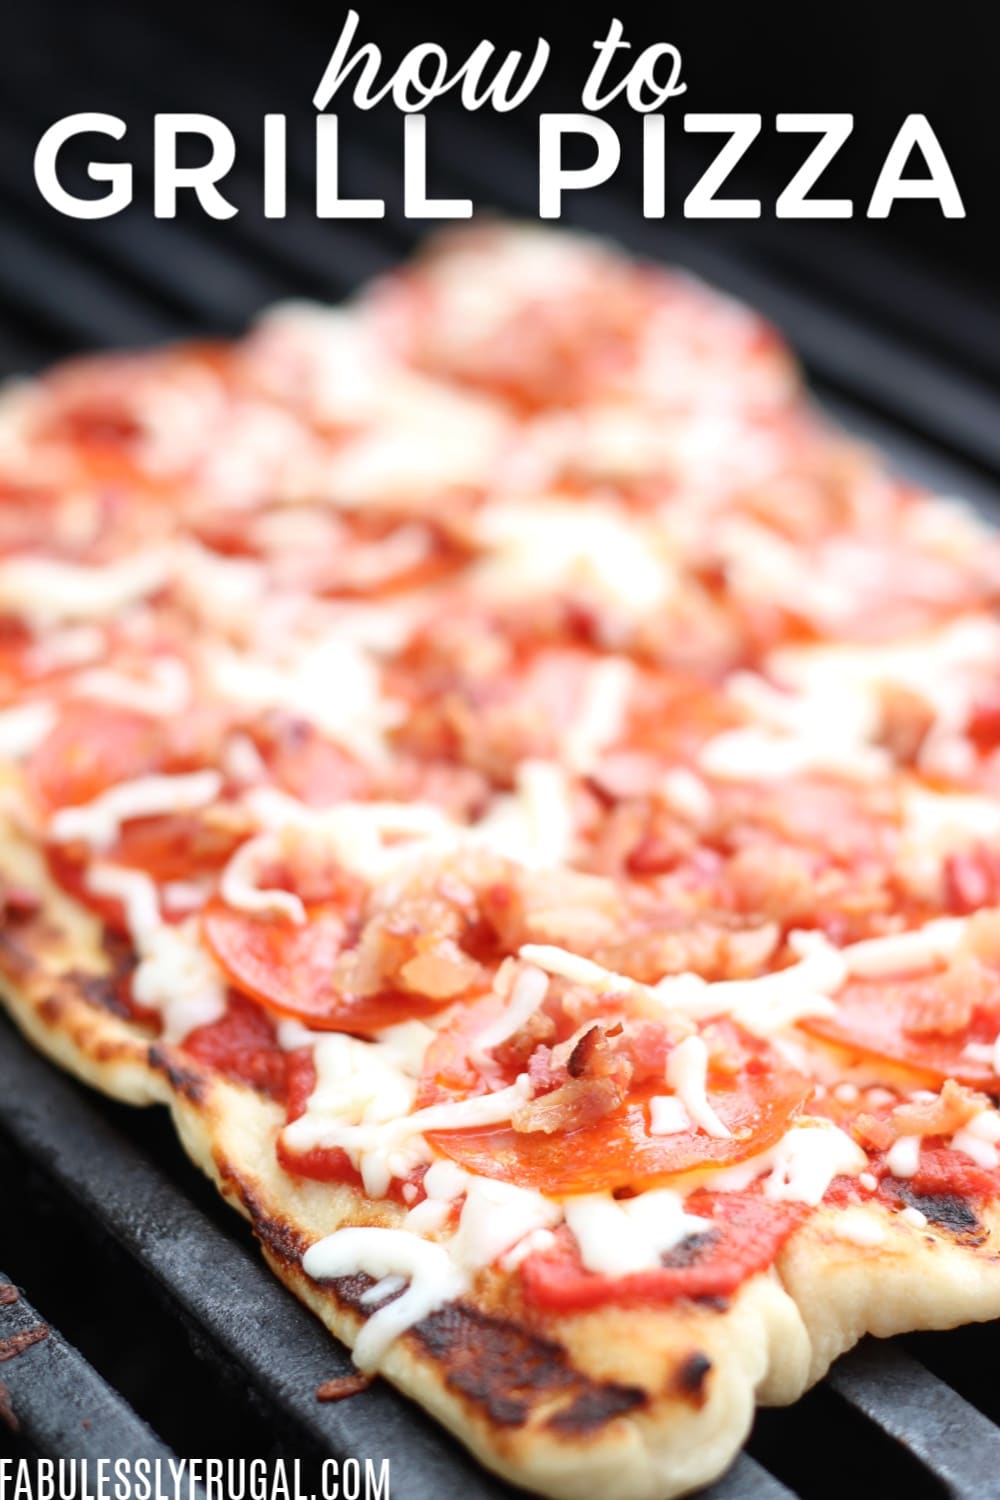 How to grill pizza easily